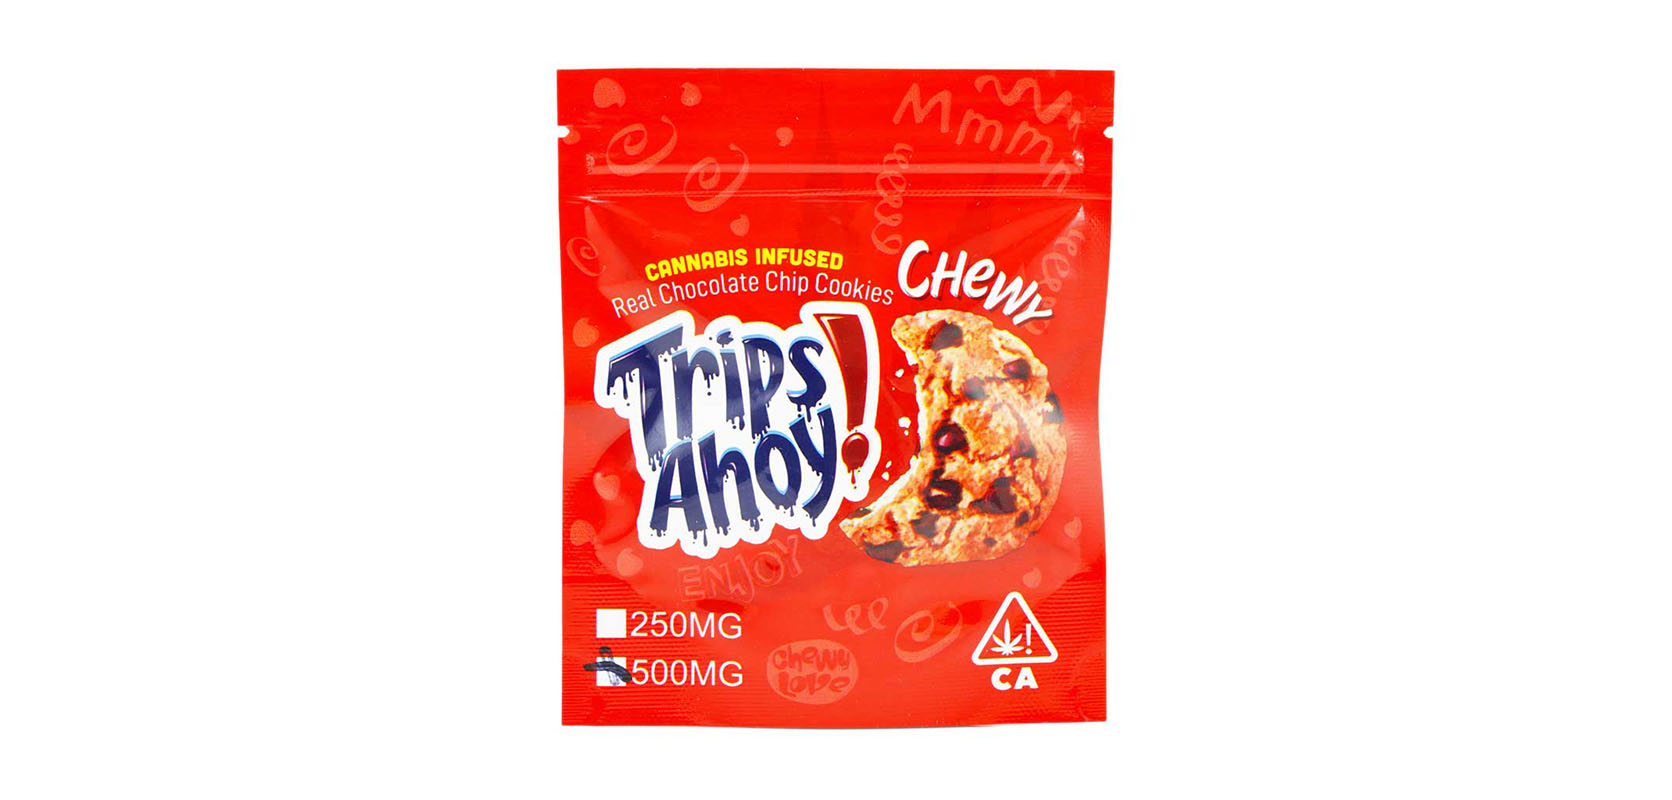 Trips Ahoy weed chocolate chip cookies. Cannabis infused weed candy THC edibles from low price bud dispensary for edibles online Canada. Buy weed online.